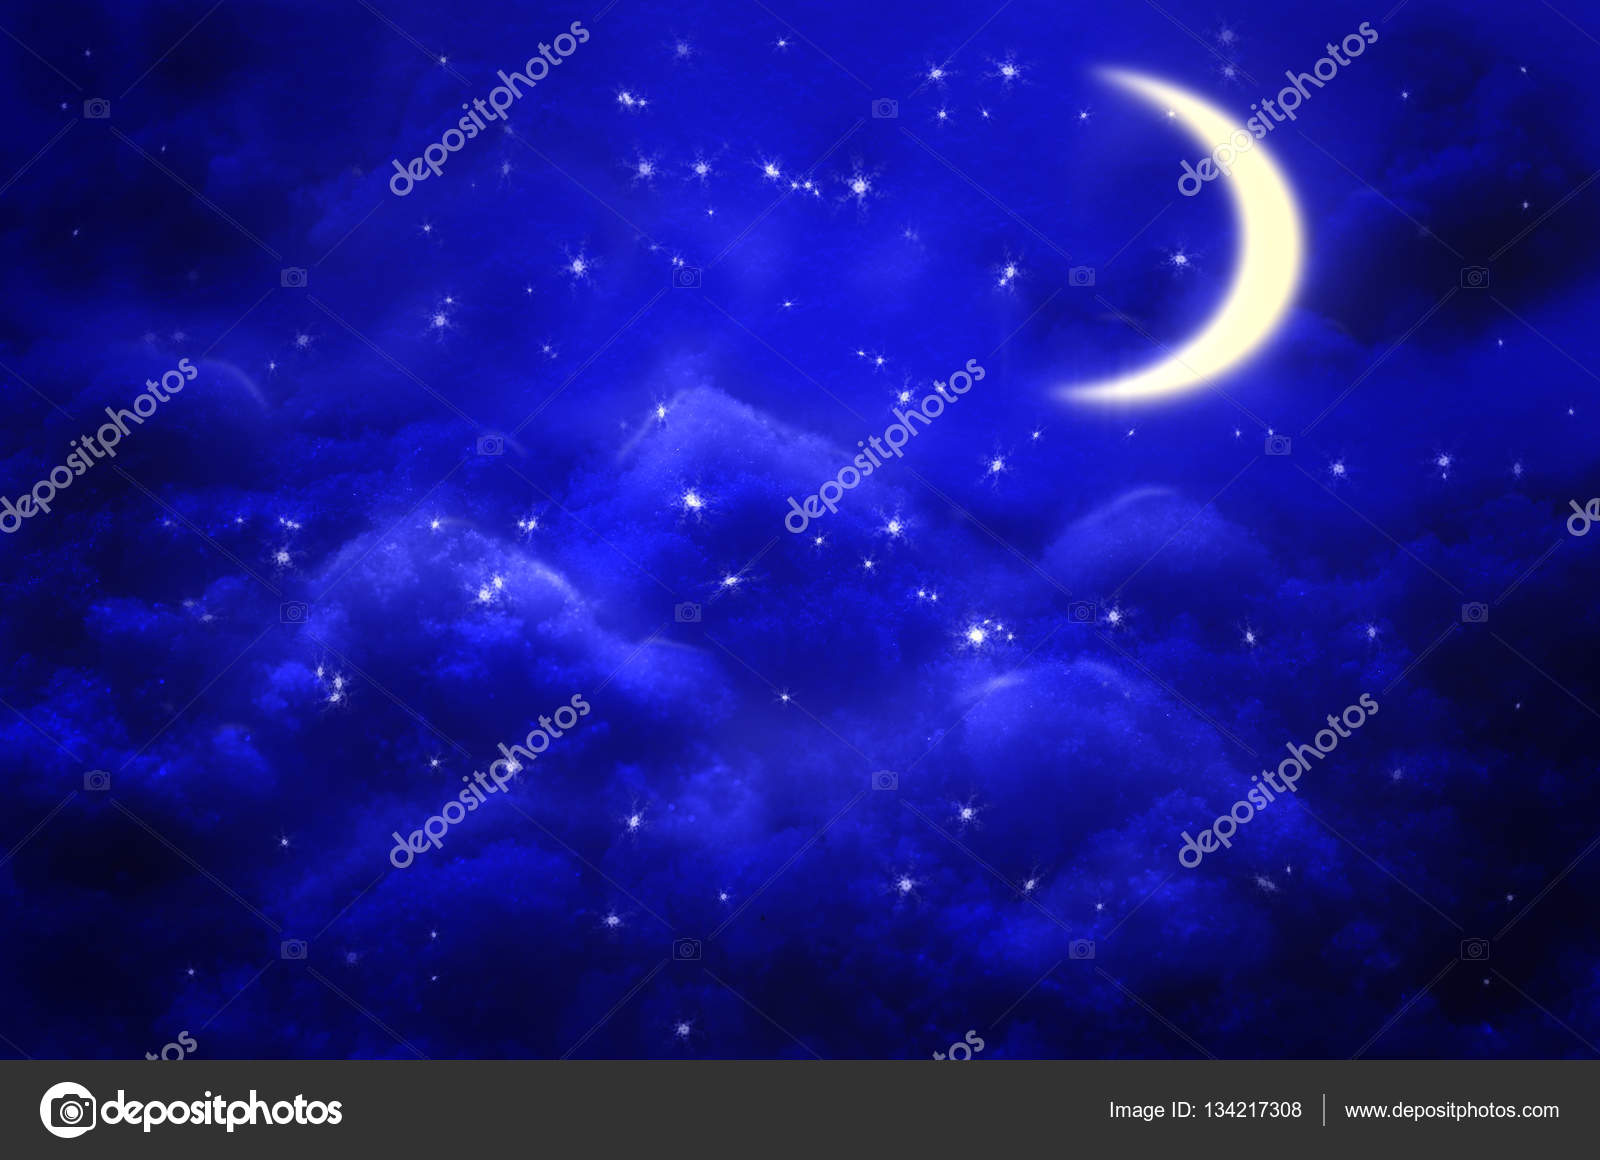 Blue moon background Stock Photos, Royalty Free Blue moon background Images  | Depositphotos